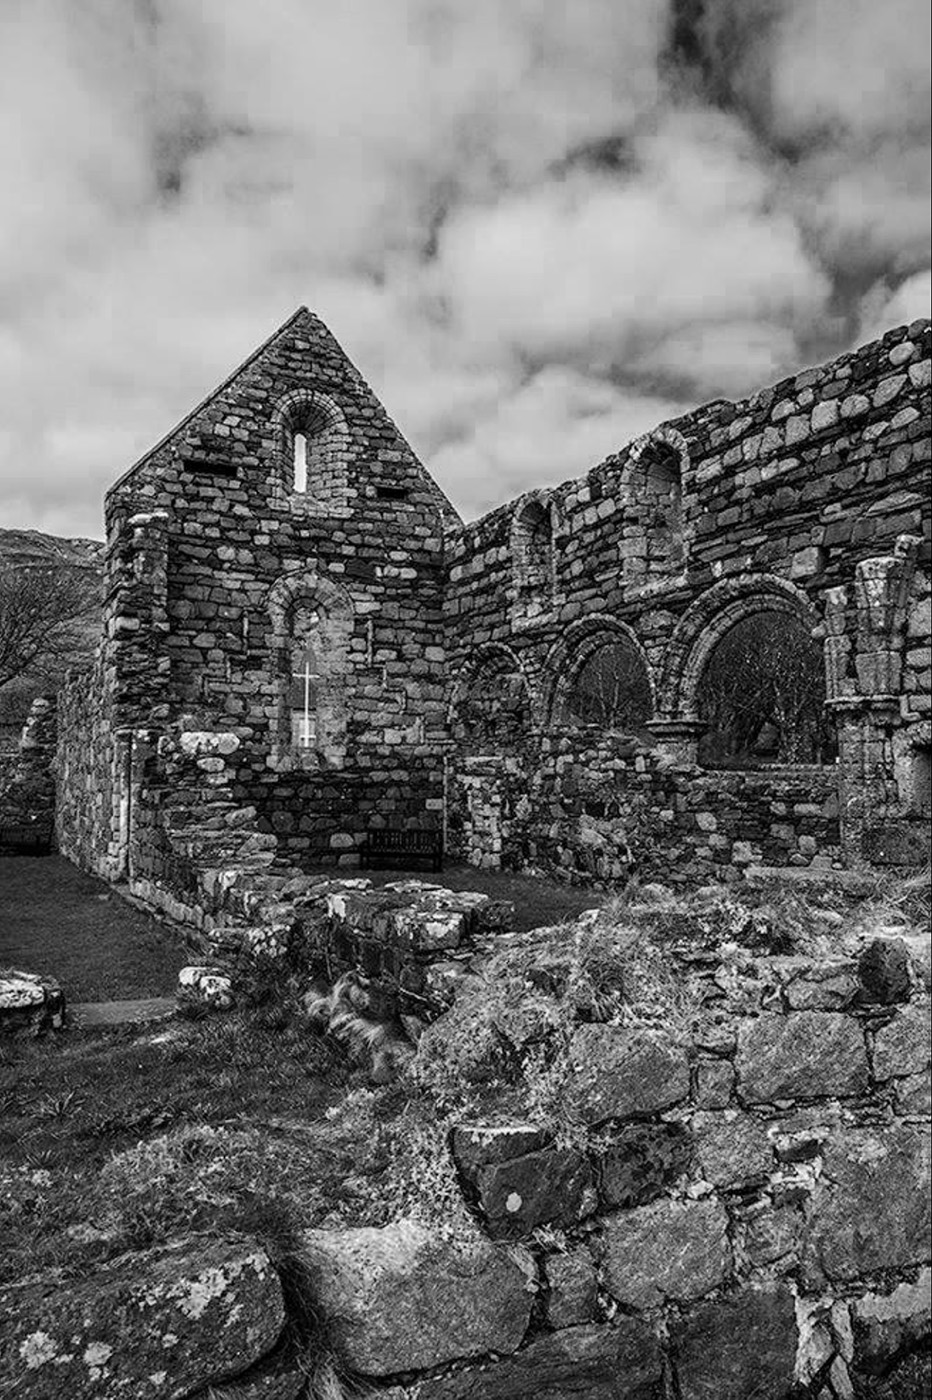 3rd Joint in Oct, Member 20 BC – Iona Church